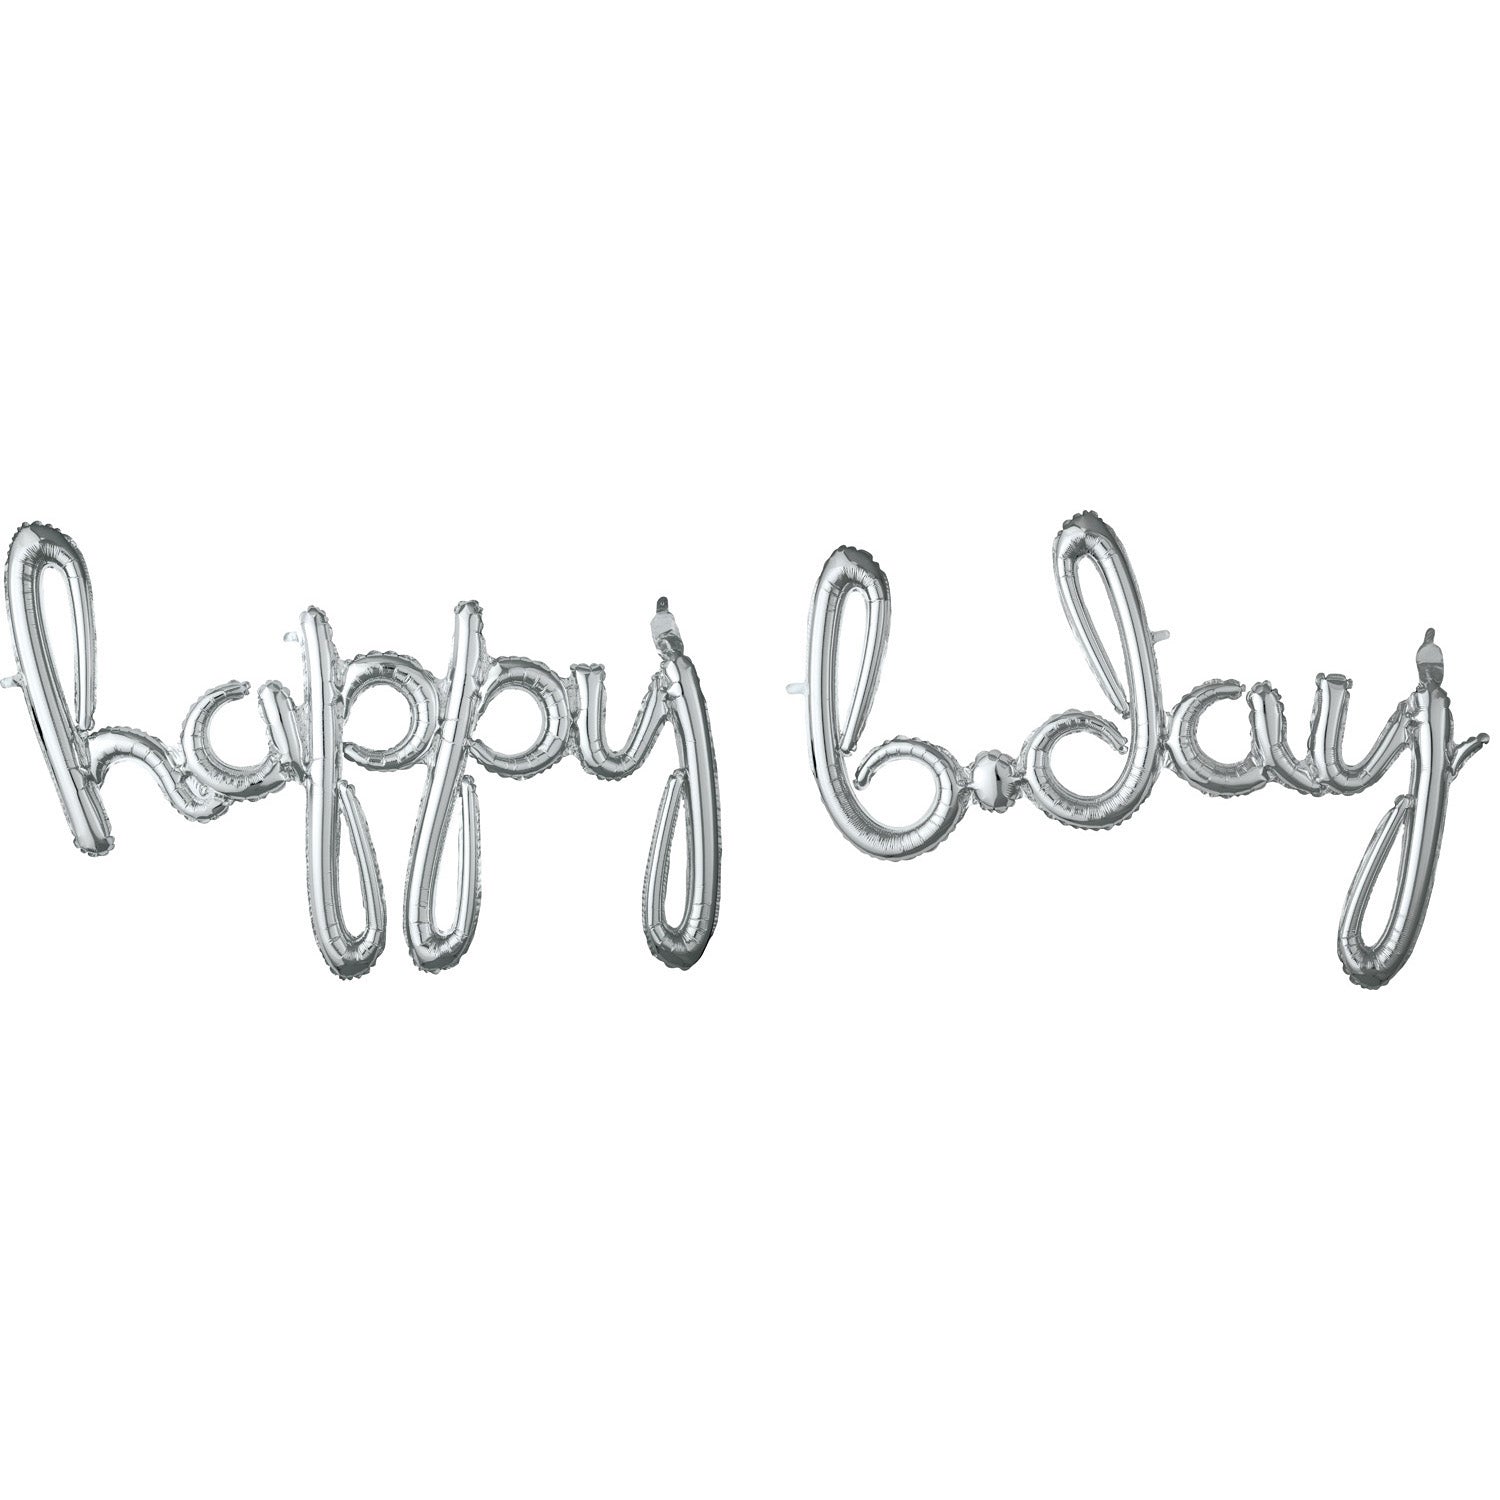 Silver lettering happy bday inflatable with suction cup